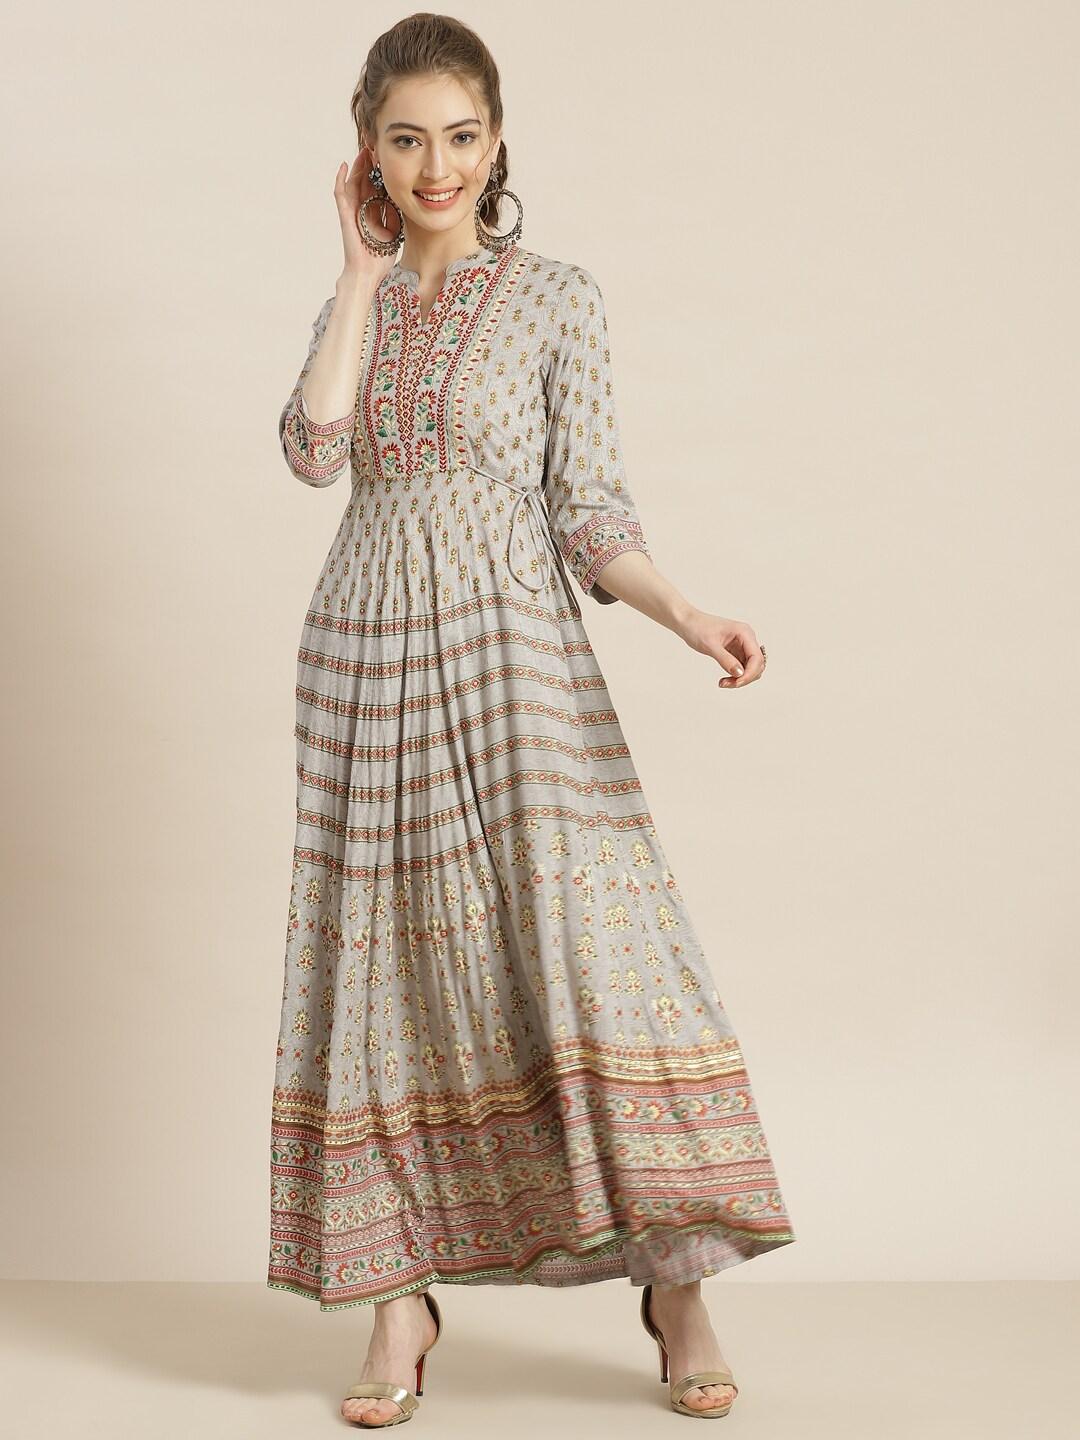 Juniper Grey & Maroon Ethnic Motifs Peinted Liva Ethnic Maxi Dress With Embroidered Detail